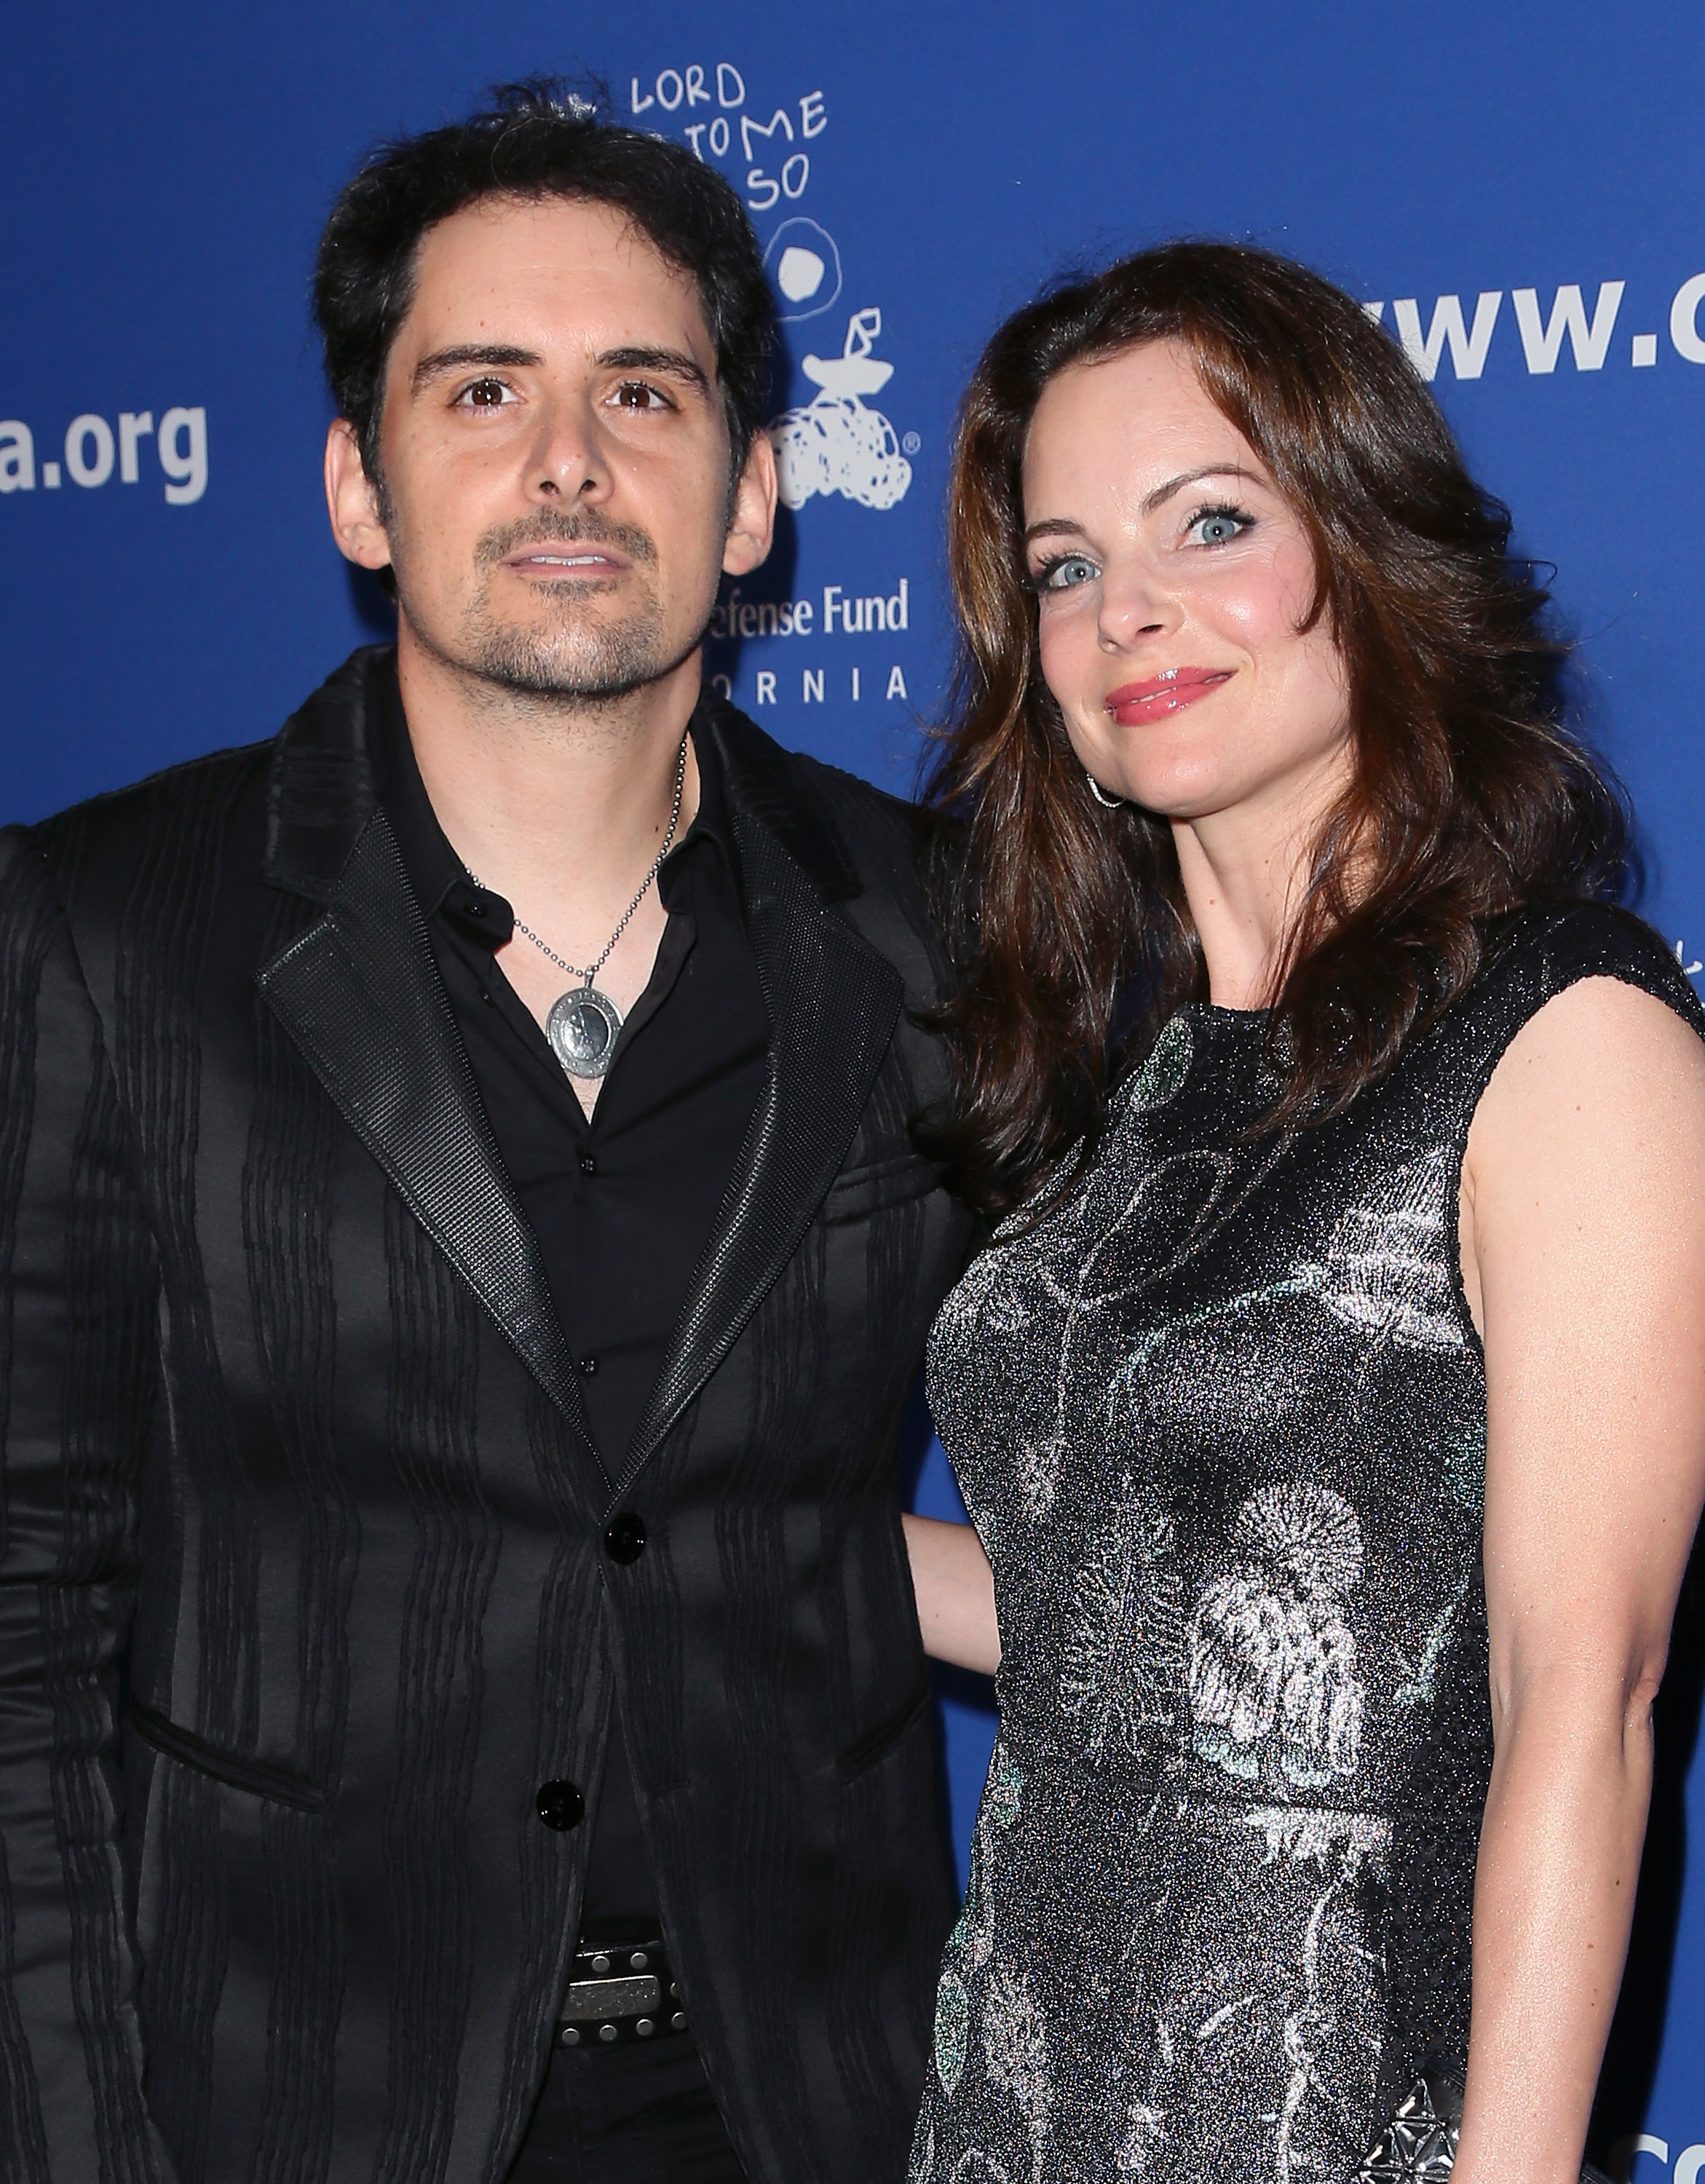 Brad Paisley and Kimberly Williams-Paisley in Culver City, California on December 4, 2014 | Source: Getty Images